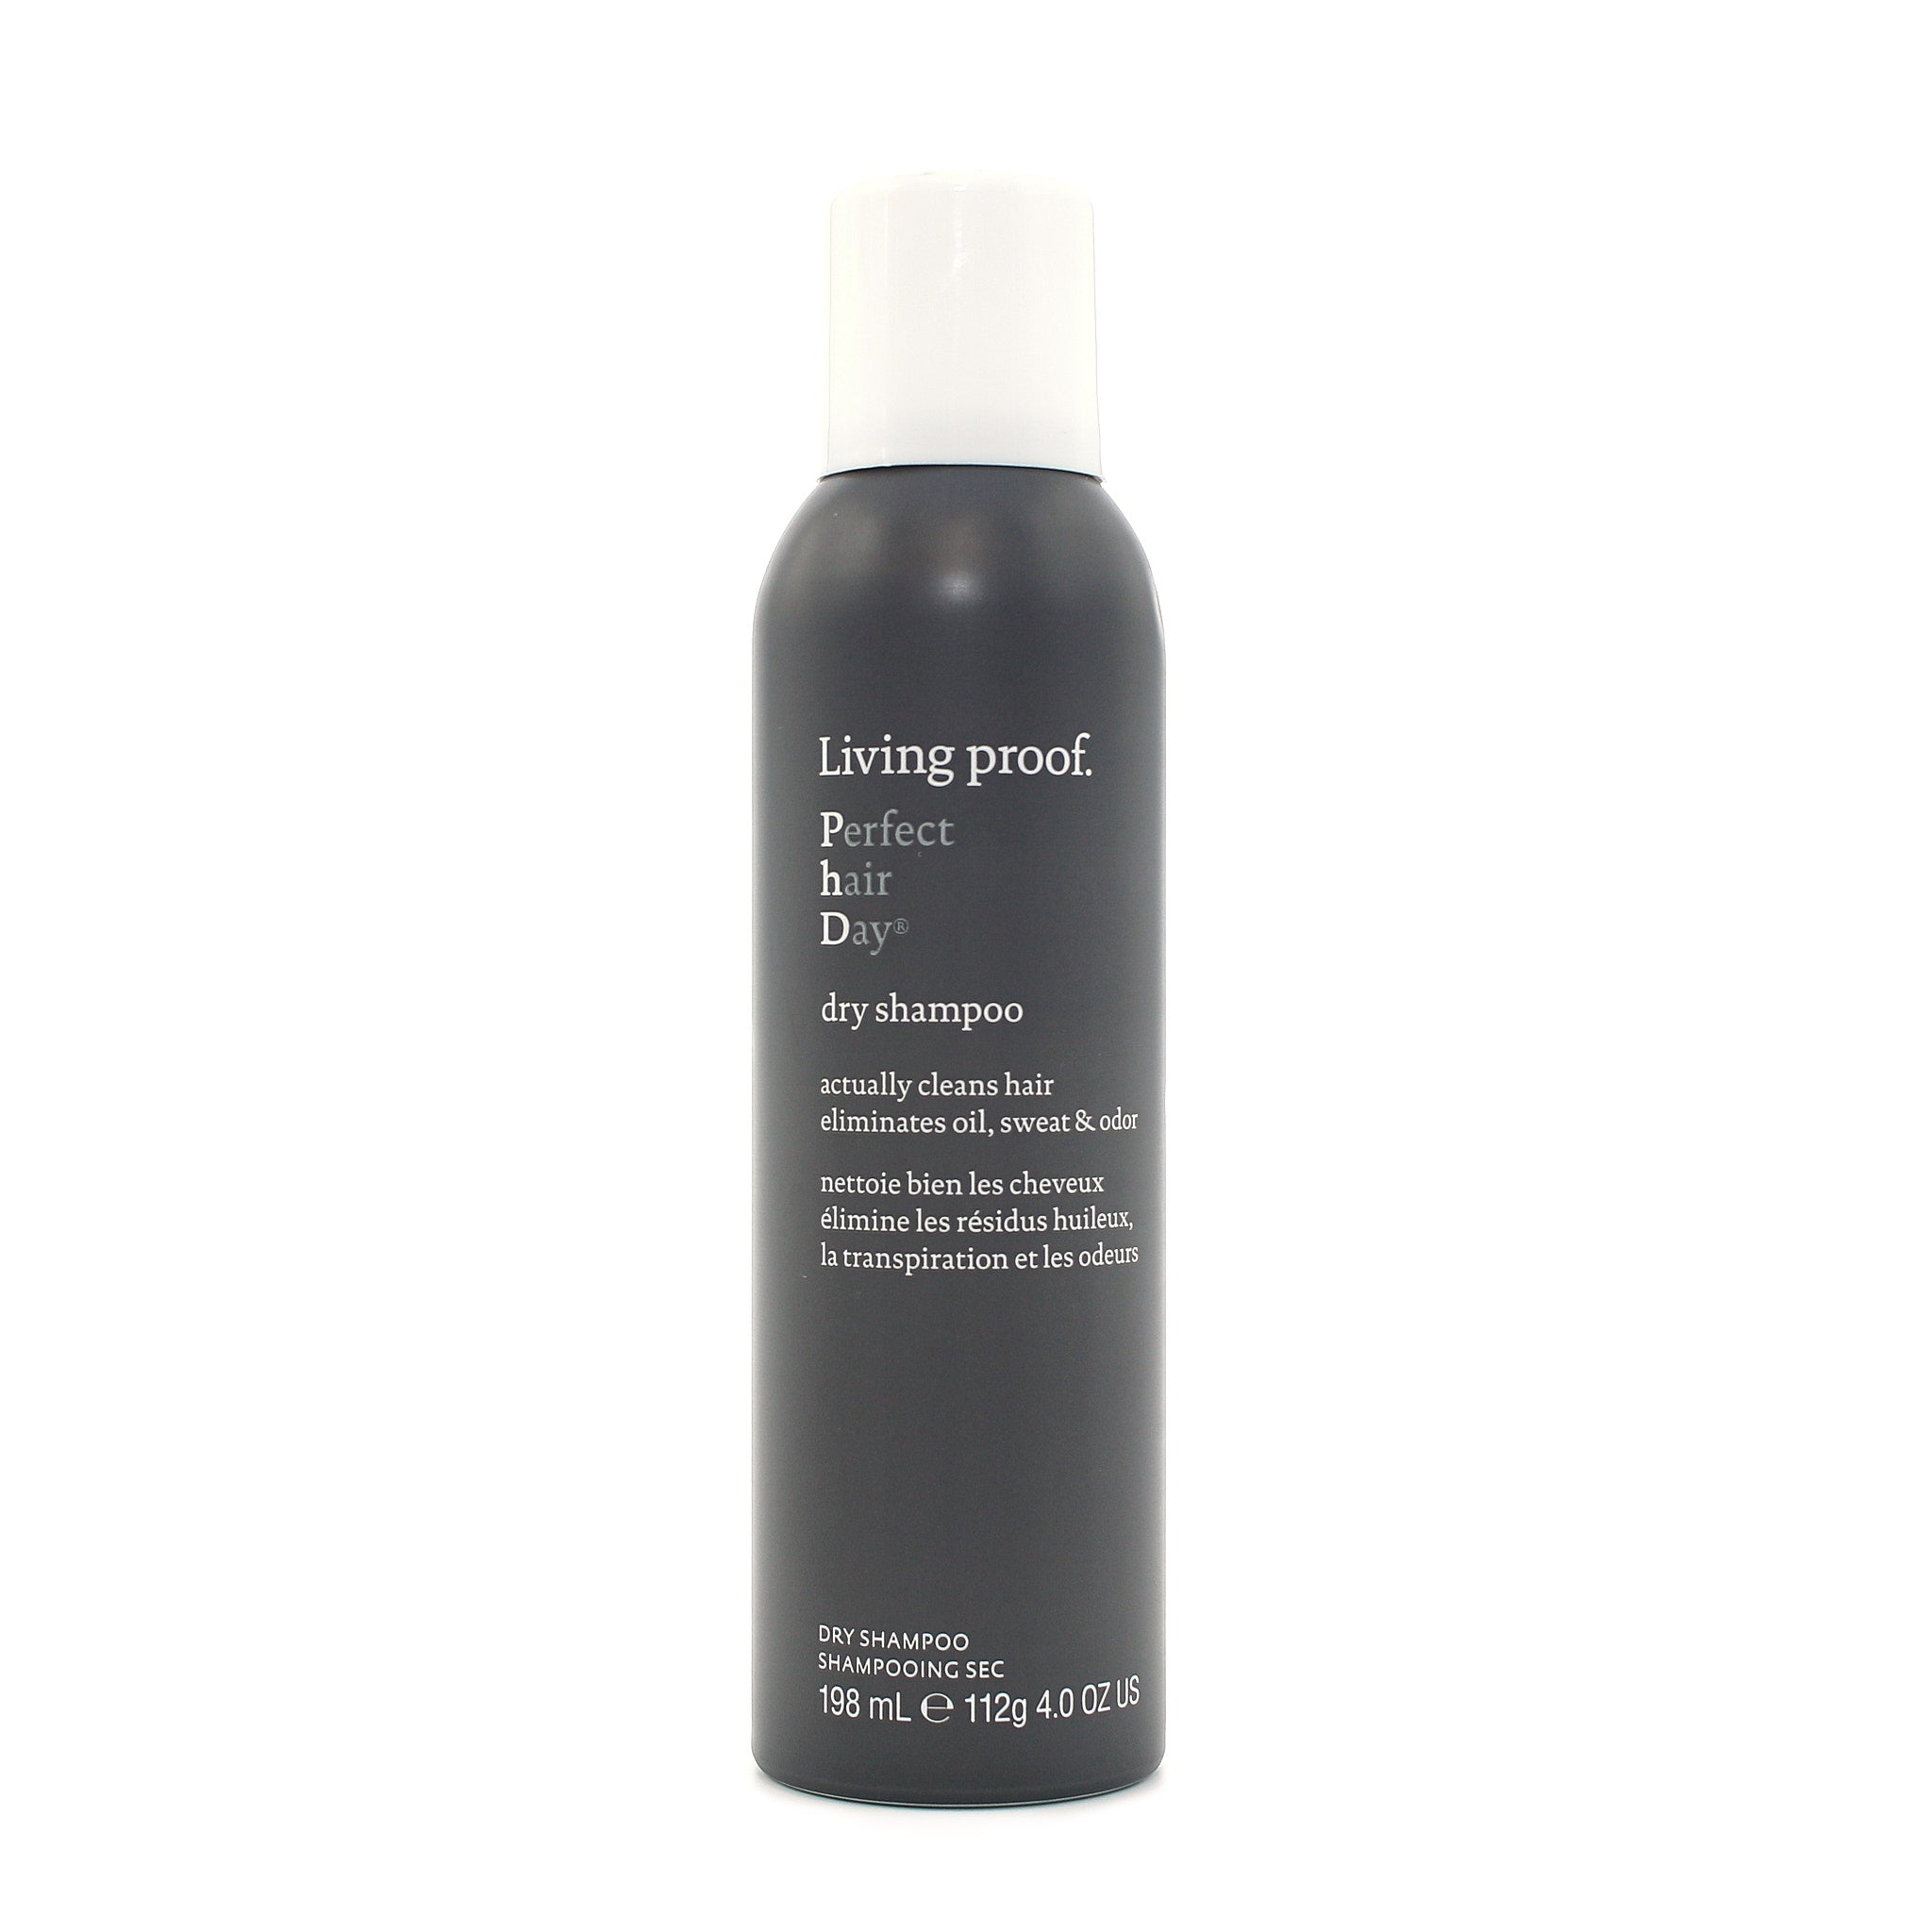 LIVING PROOF Perfect Hair Day Dry Shampoo 4 oz